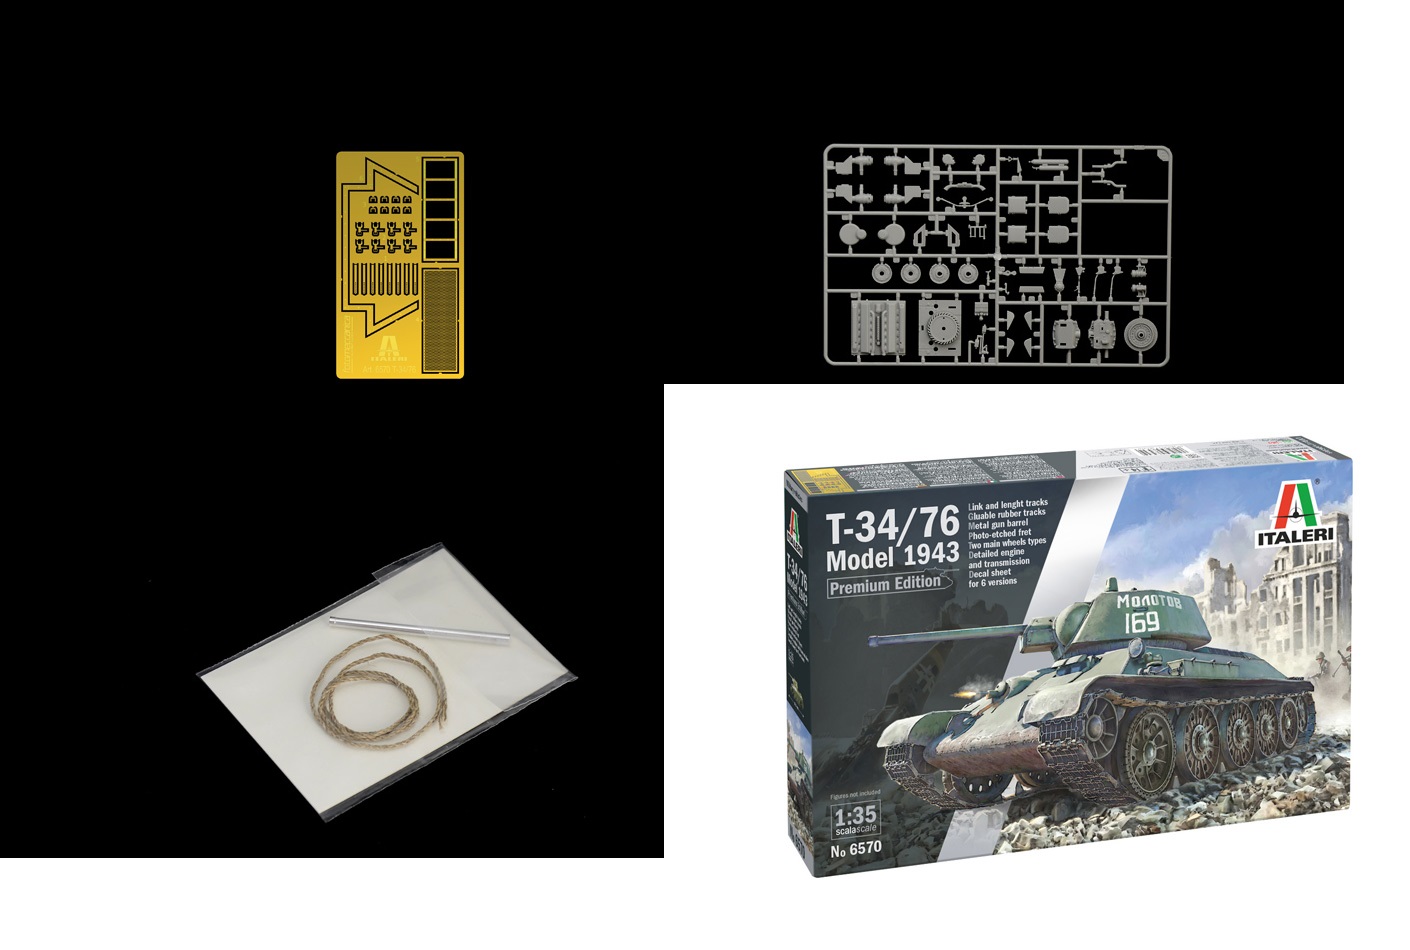 T-34/76 Model 1943 Early Version Premium Edition By Italeri # 6570 1/35 